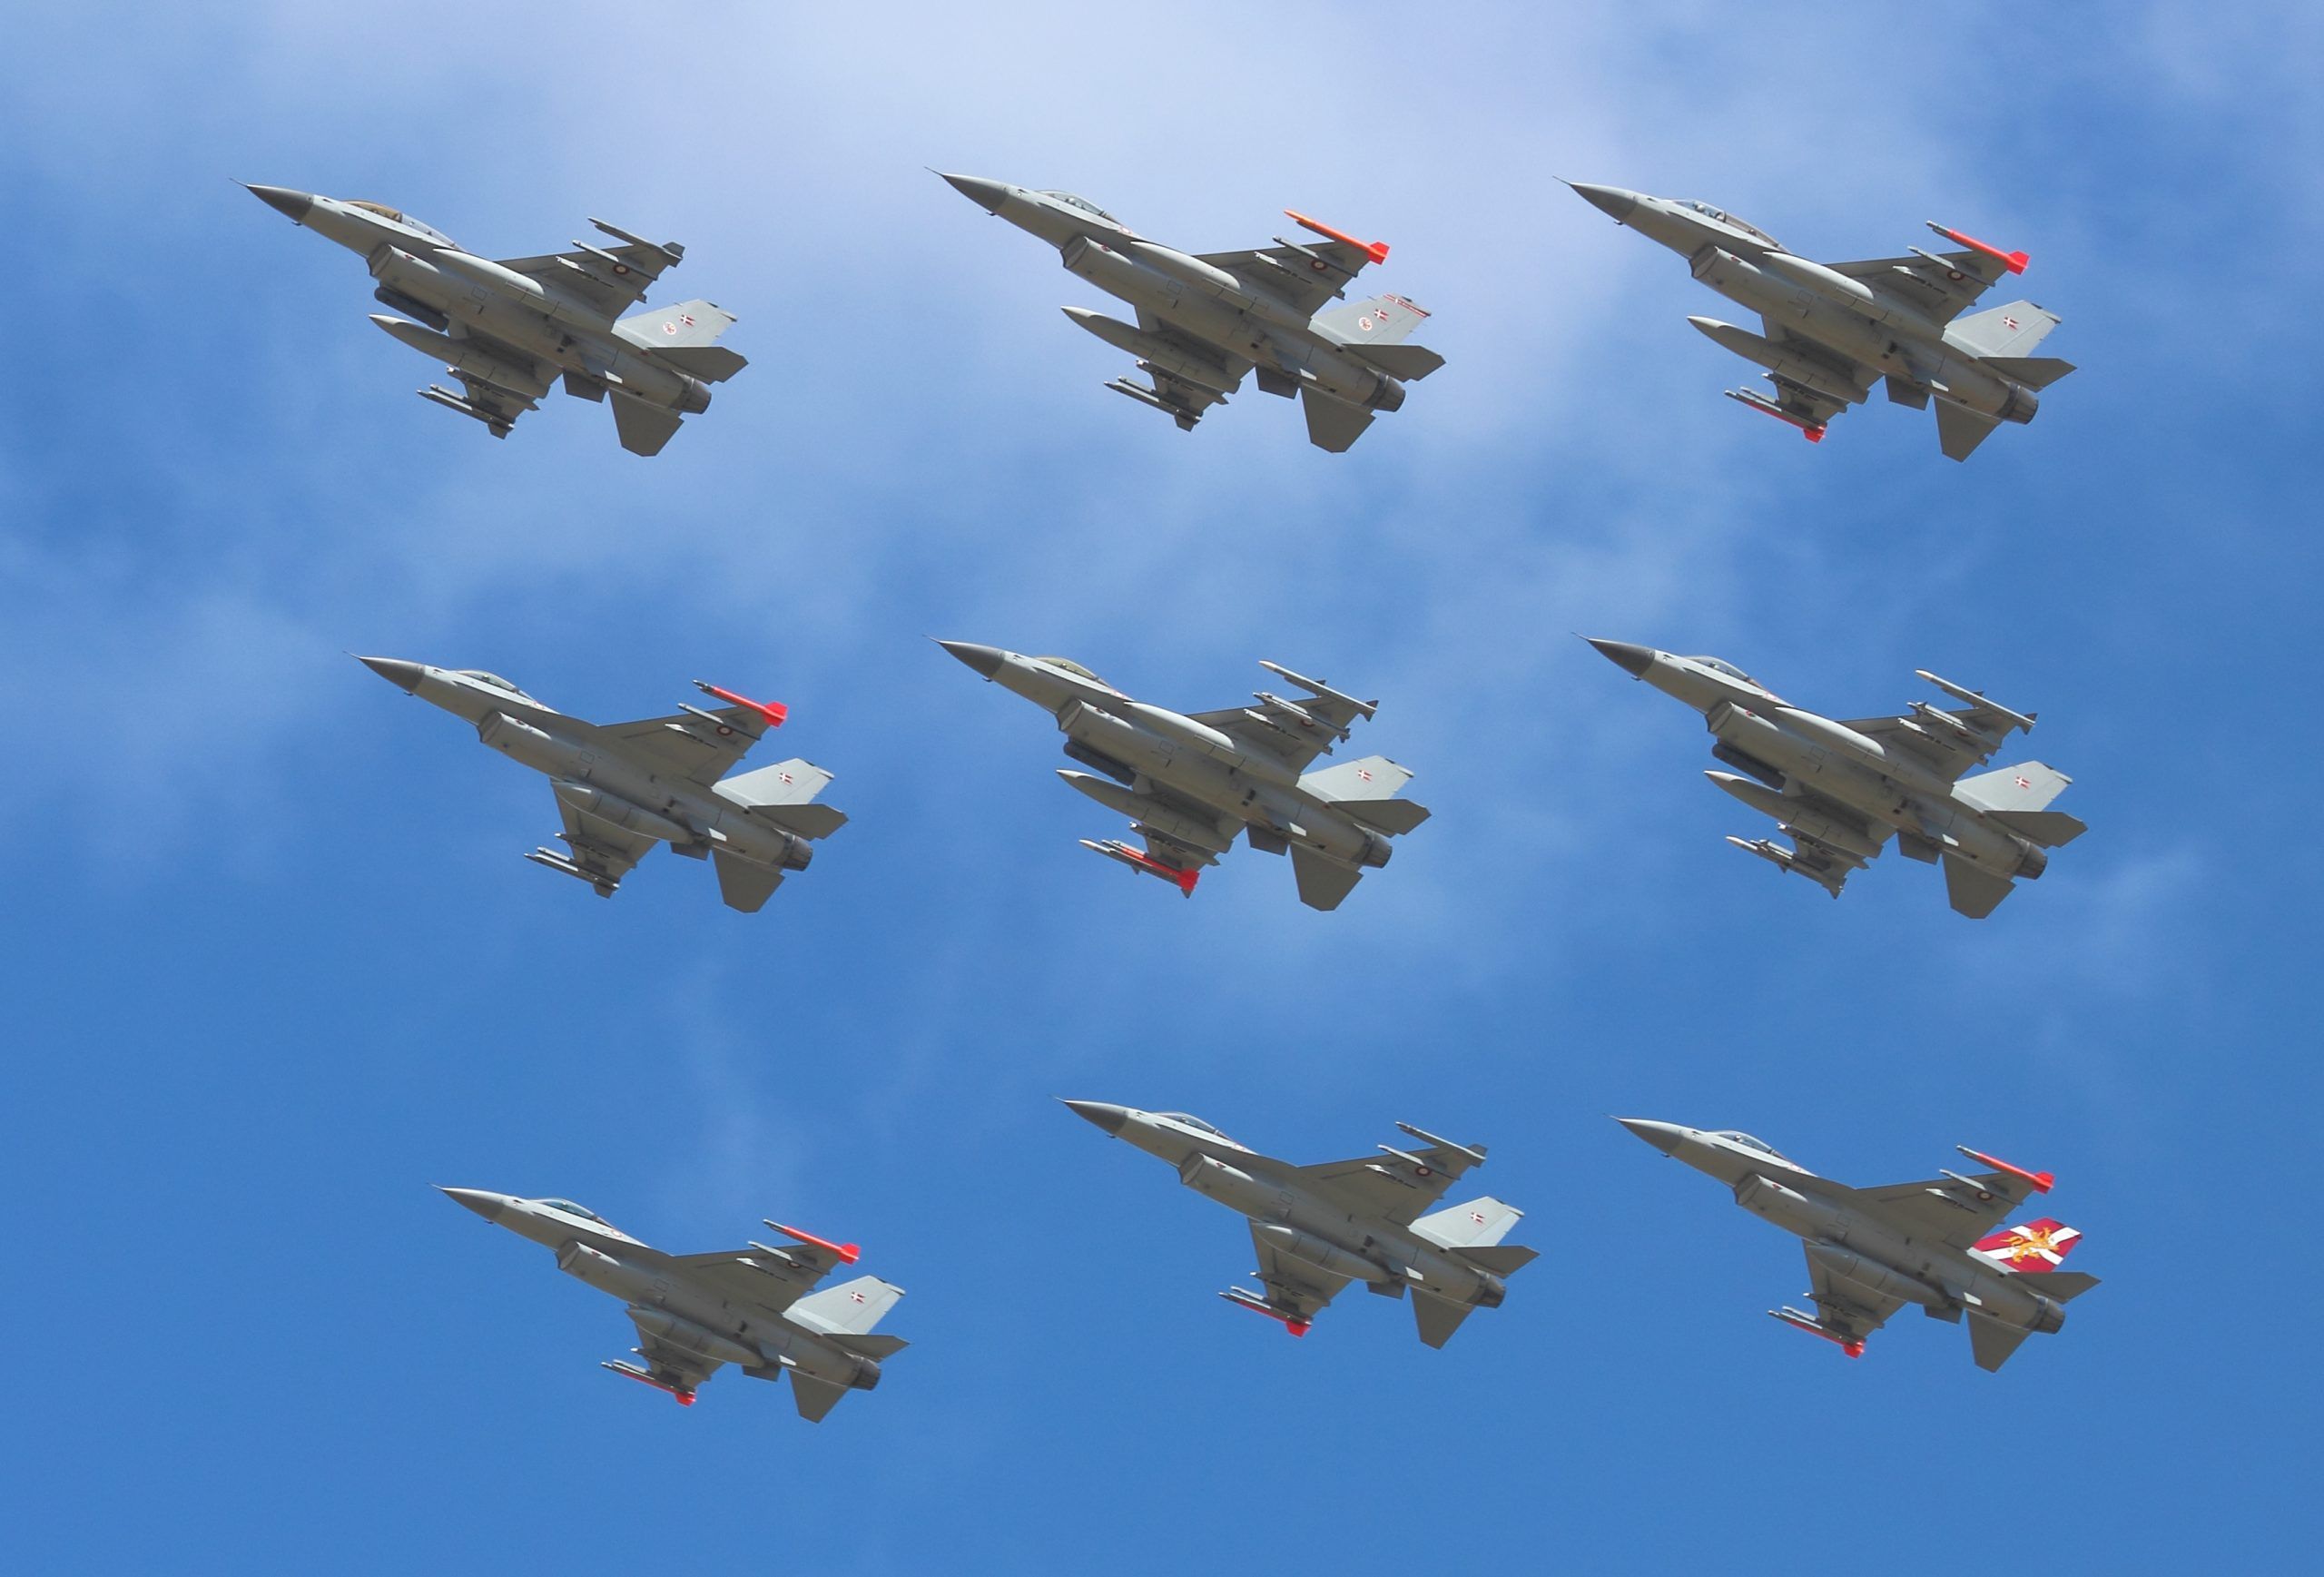 Danish Defence to sell ageing fighter jets in anticipation of new fleet arriving